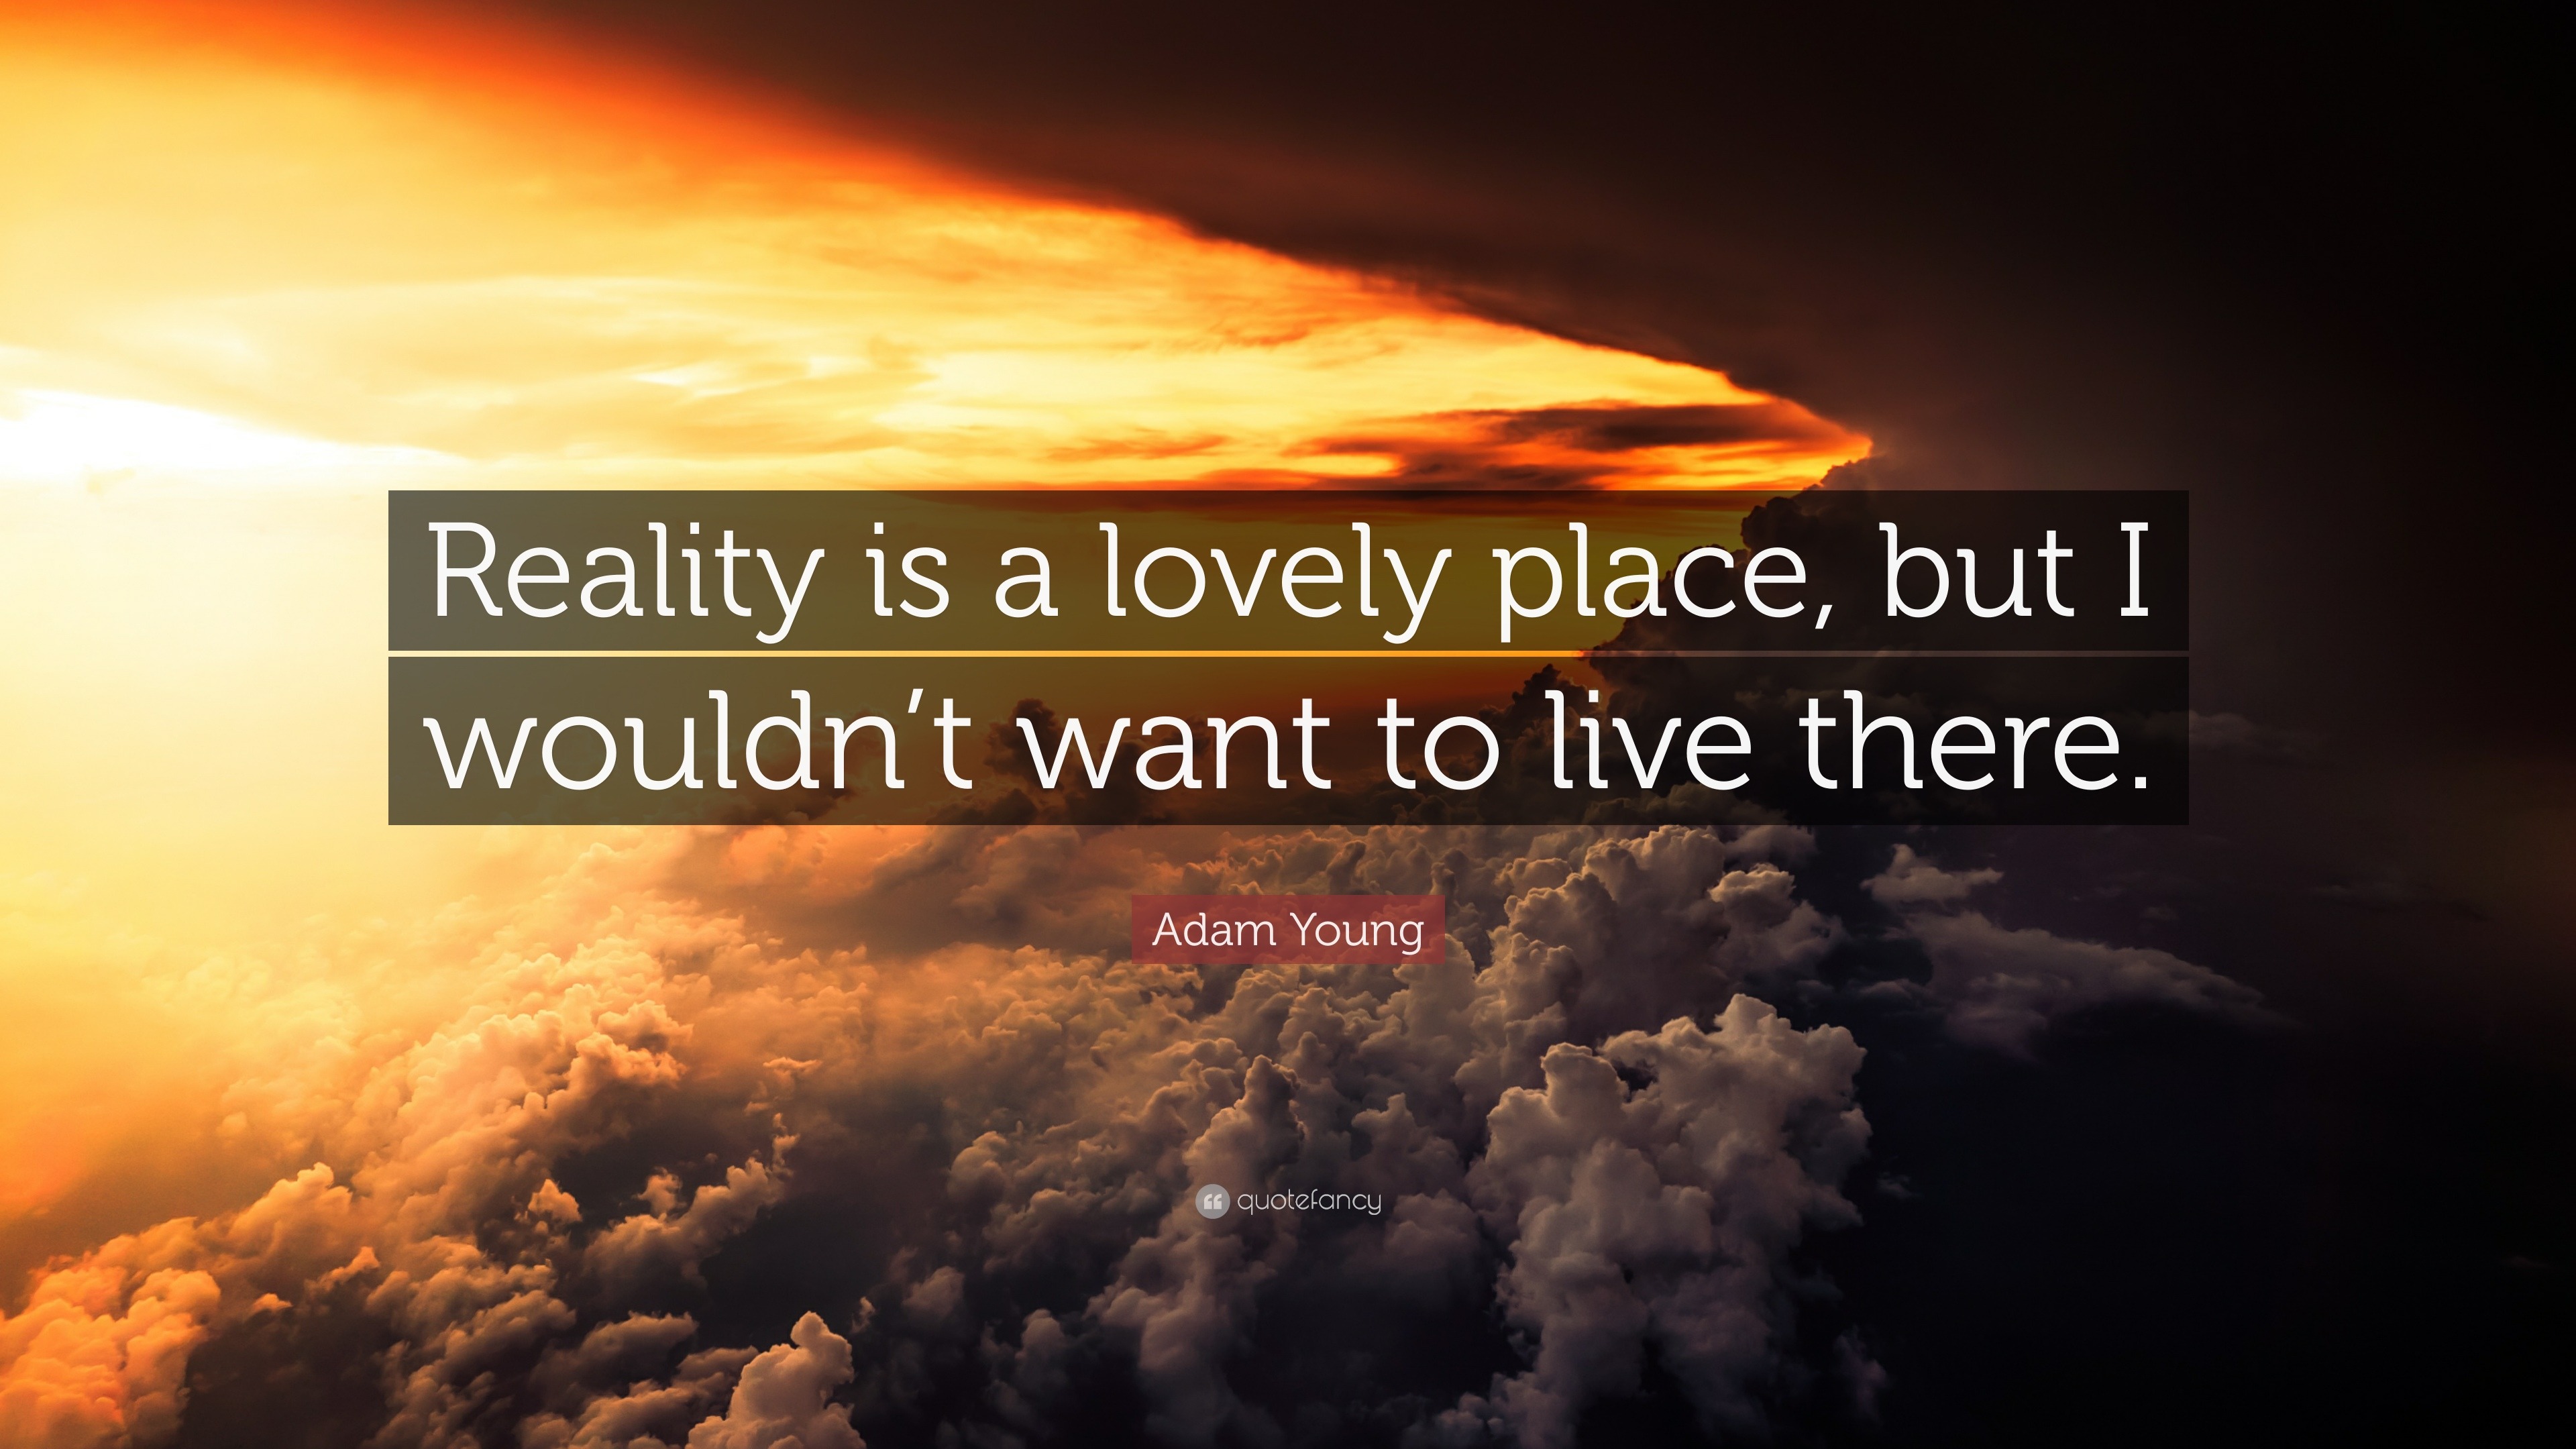 Adam Young Quote: “Reality is a lovely place, but I wouldn’t want to ...